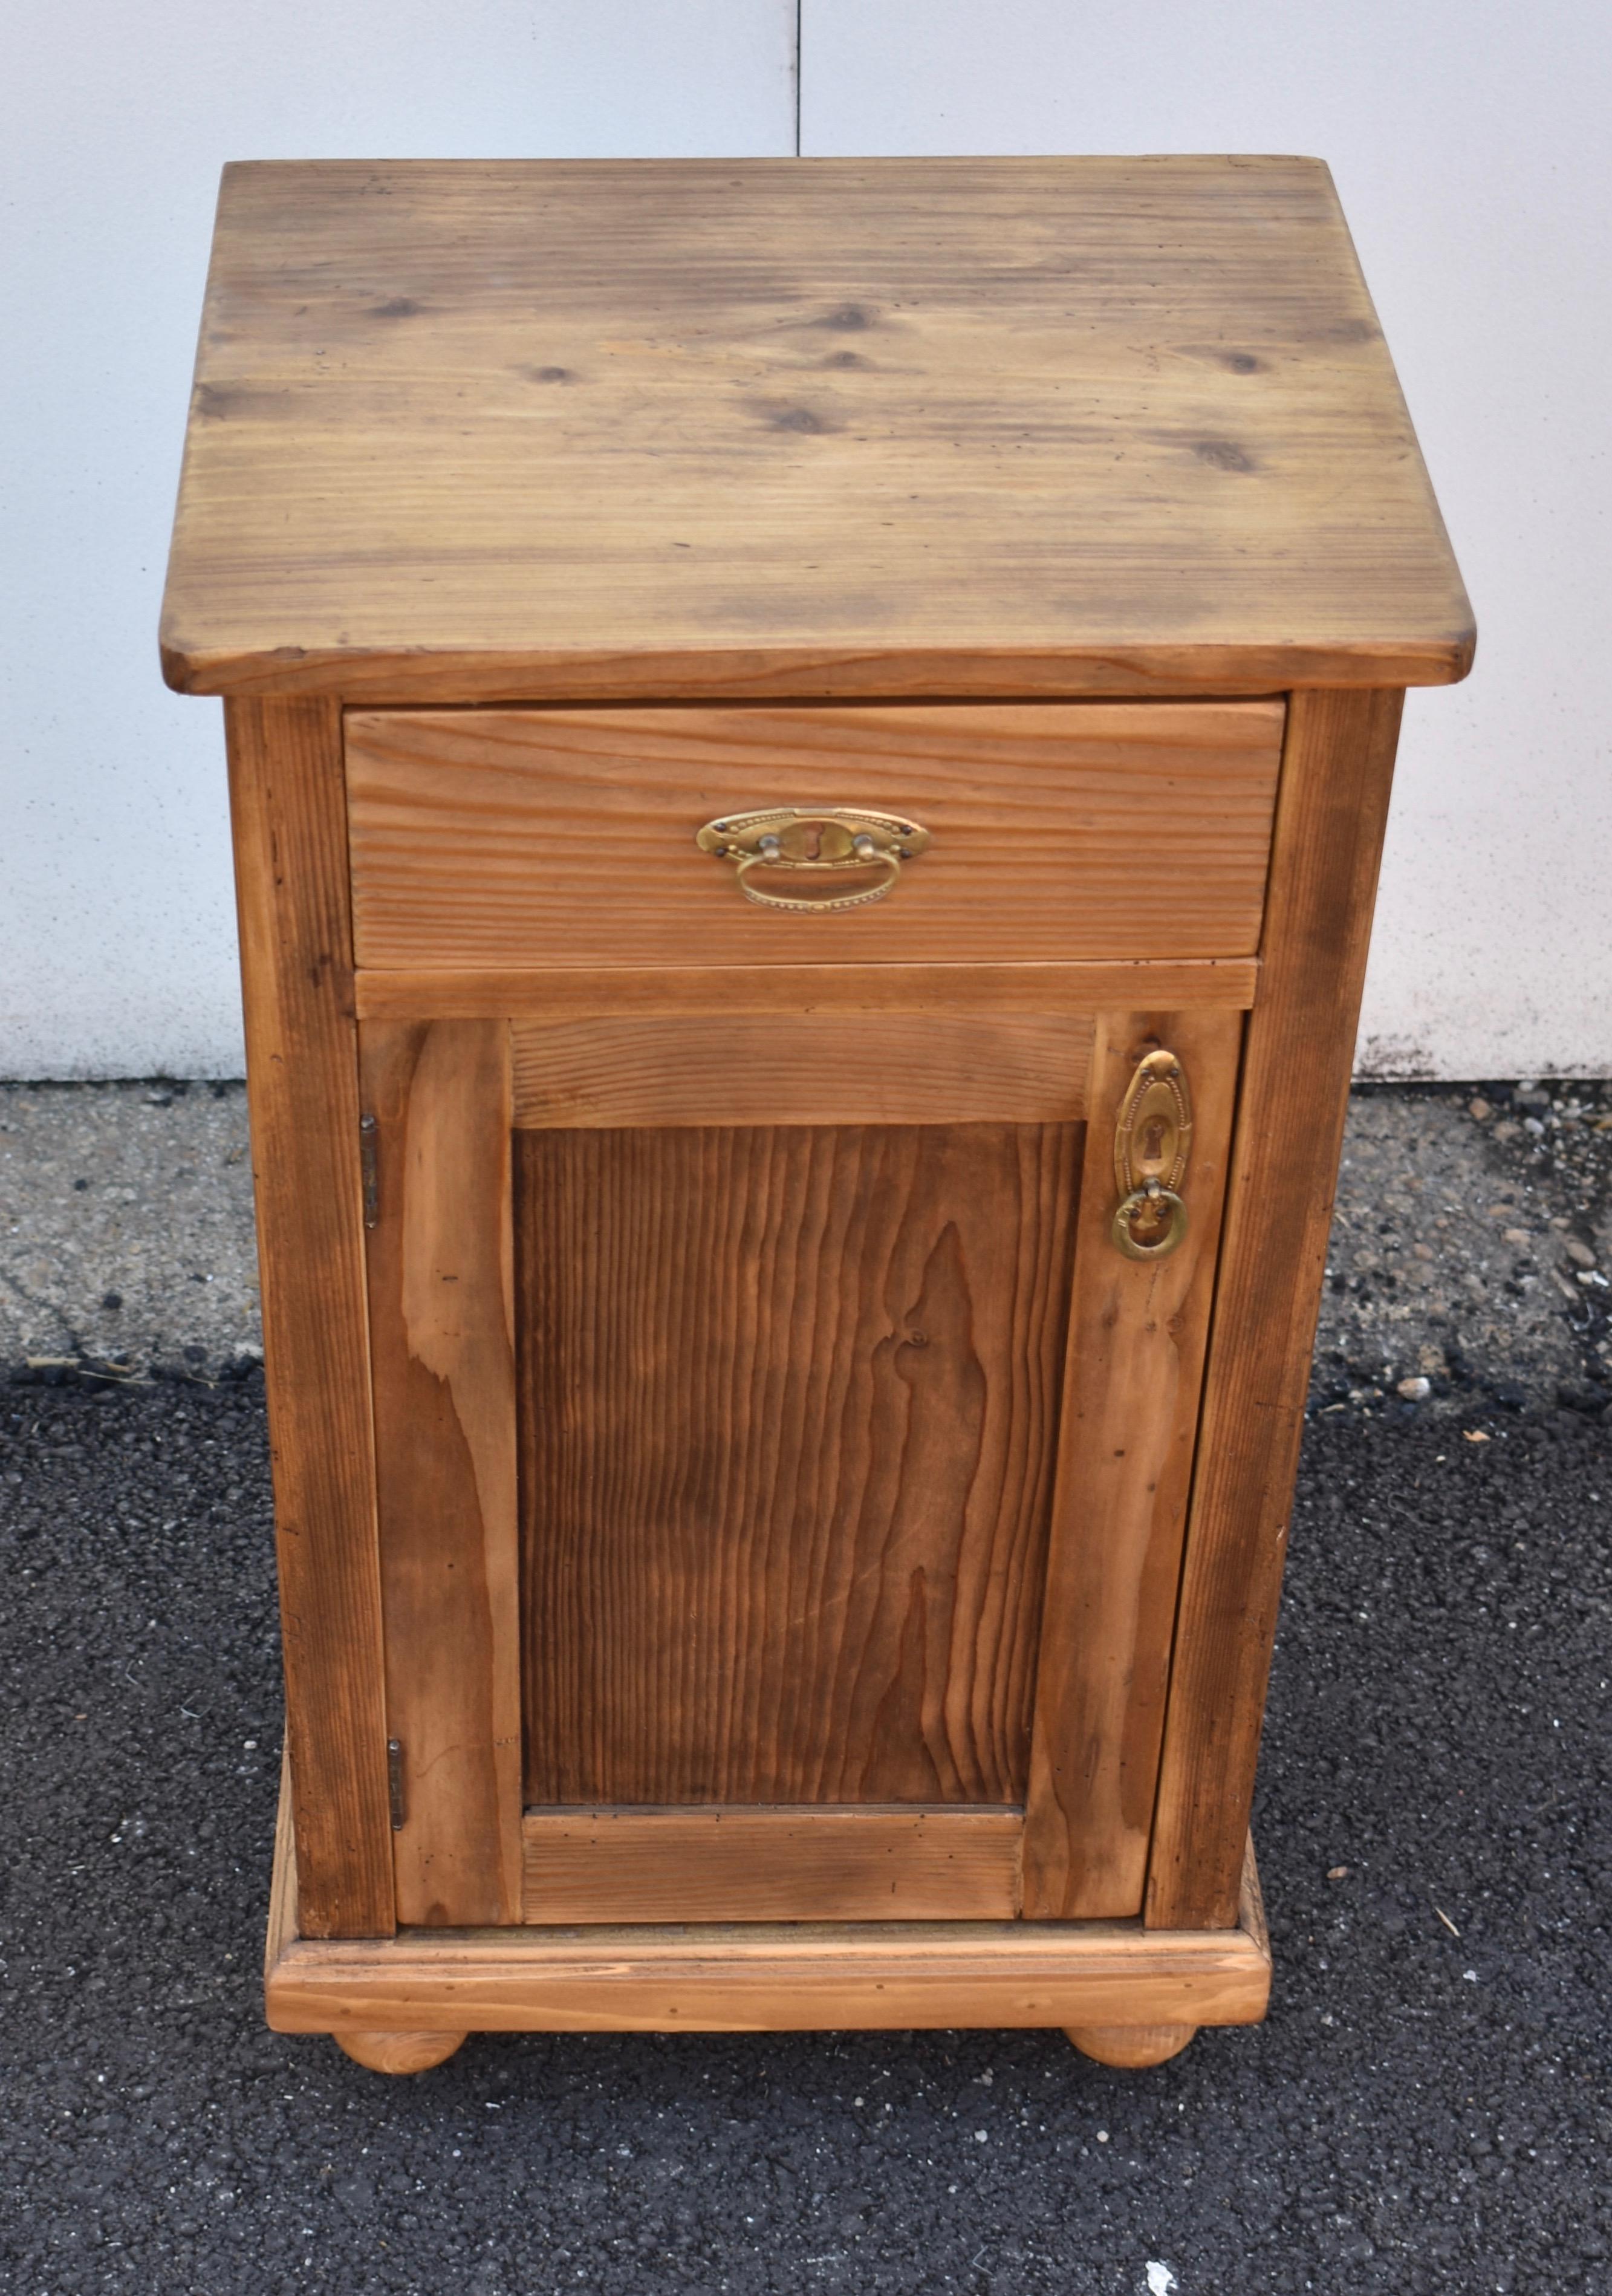 This small nightstand has a strong grain pattern and a rich rugger brown color. The drawer is beautifully dovetailed, the front corners are blunted, and both door and drawer have lovely pressed brass hardware.

 